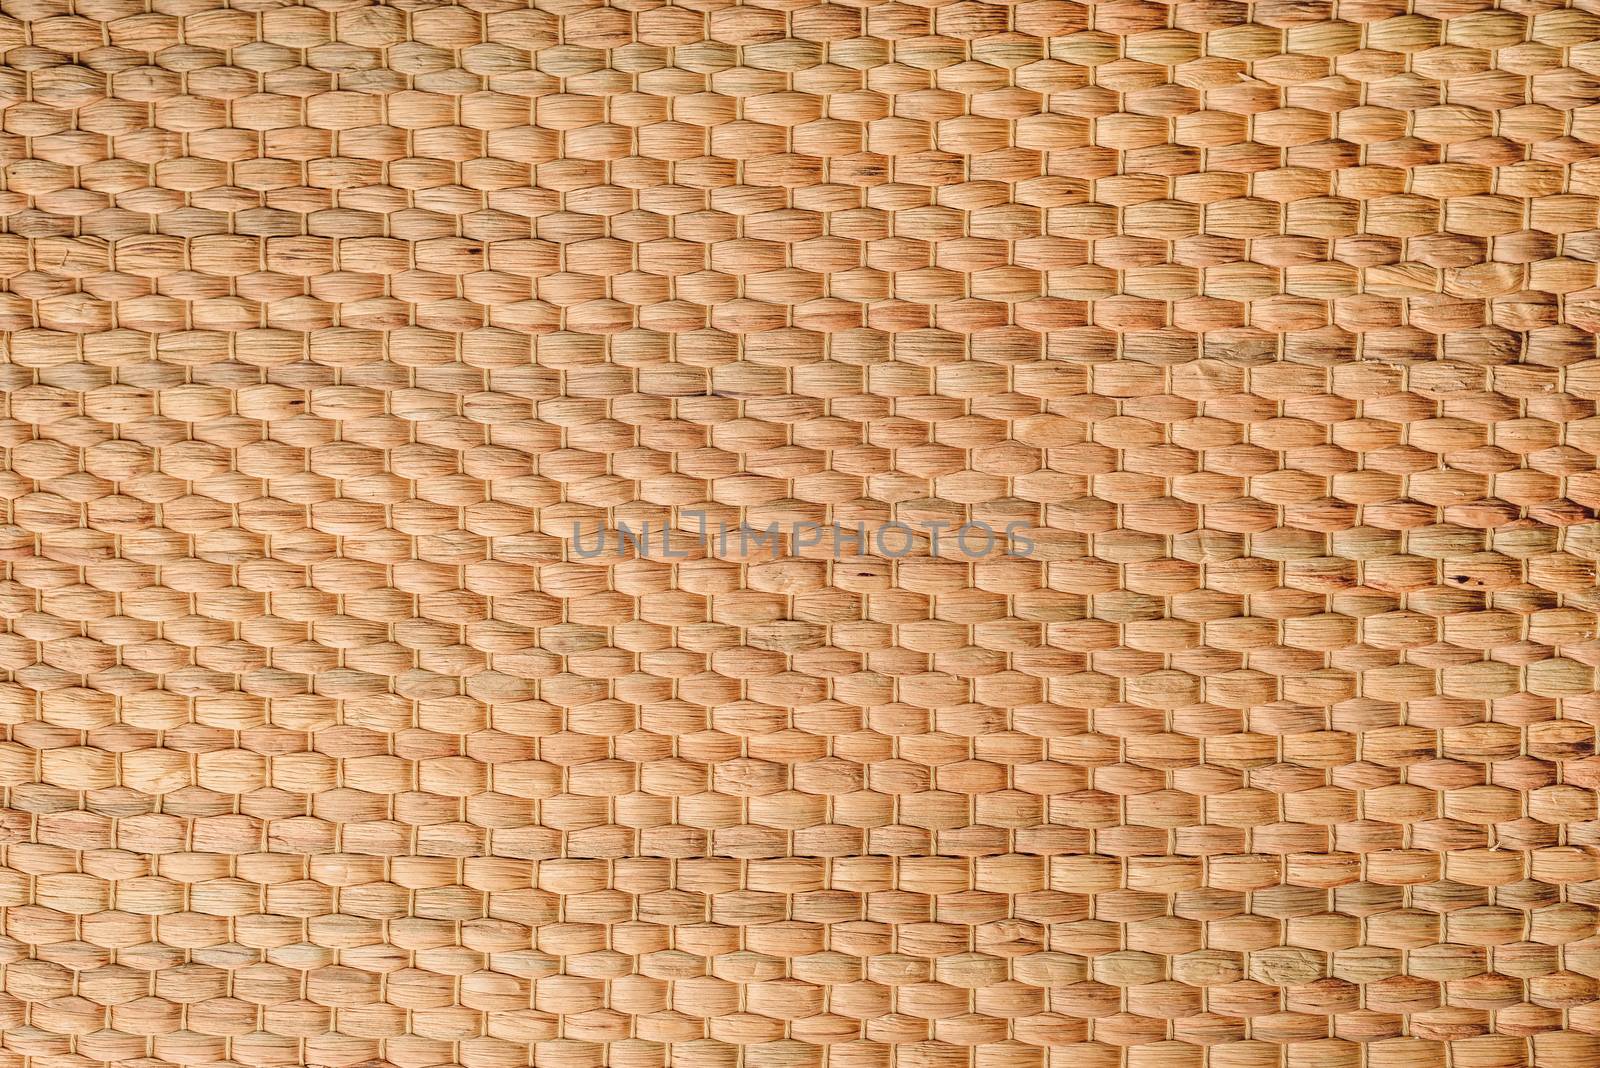 Texture of Craft Weaved Bamboo Wall Background.